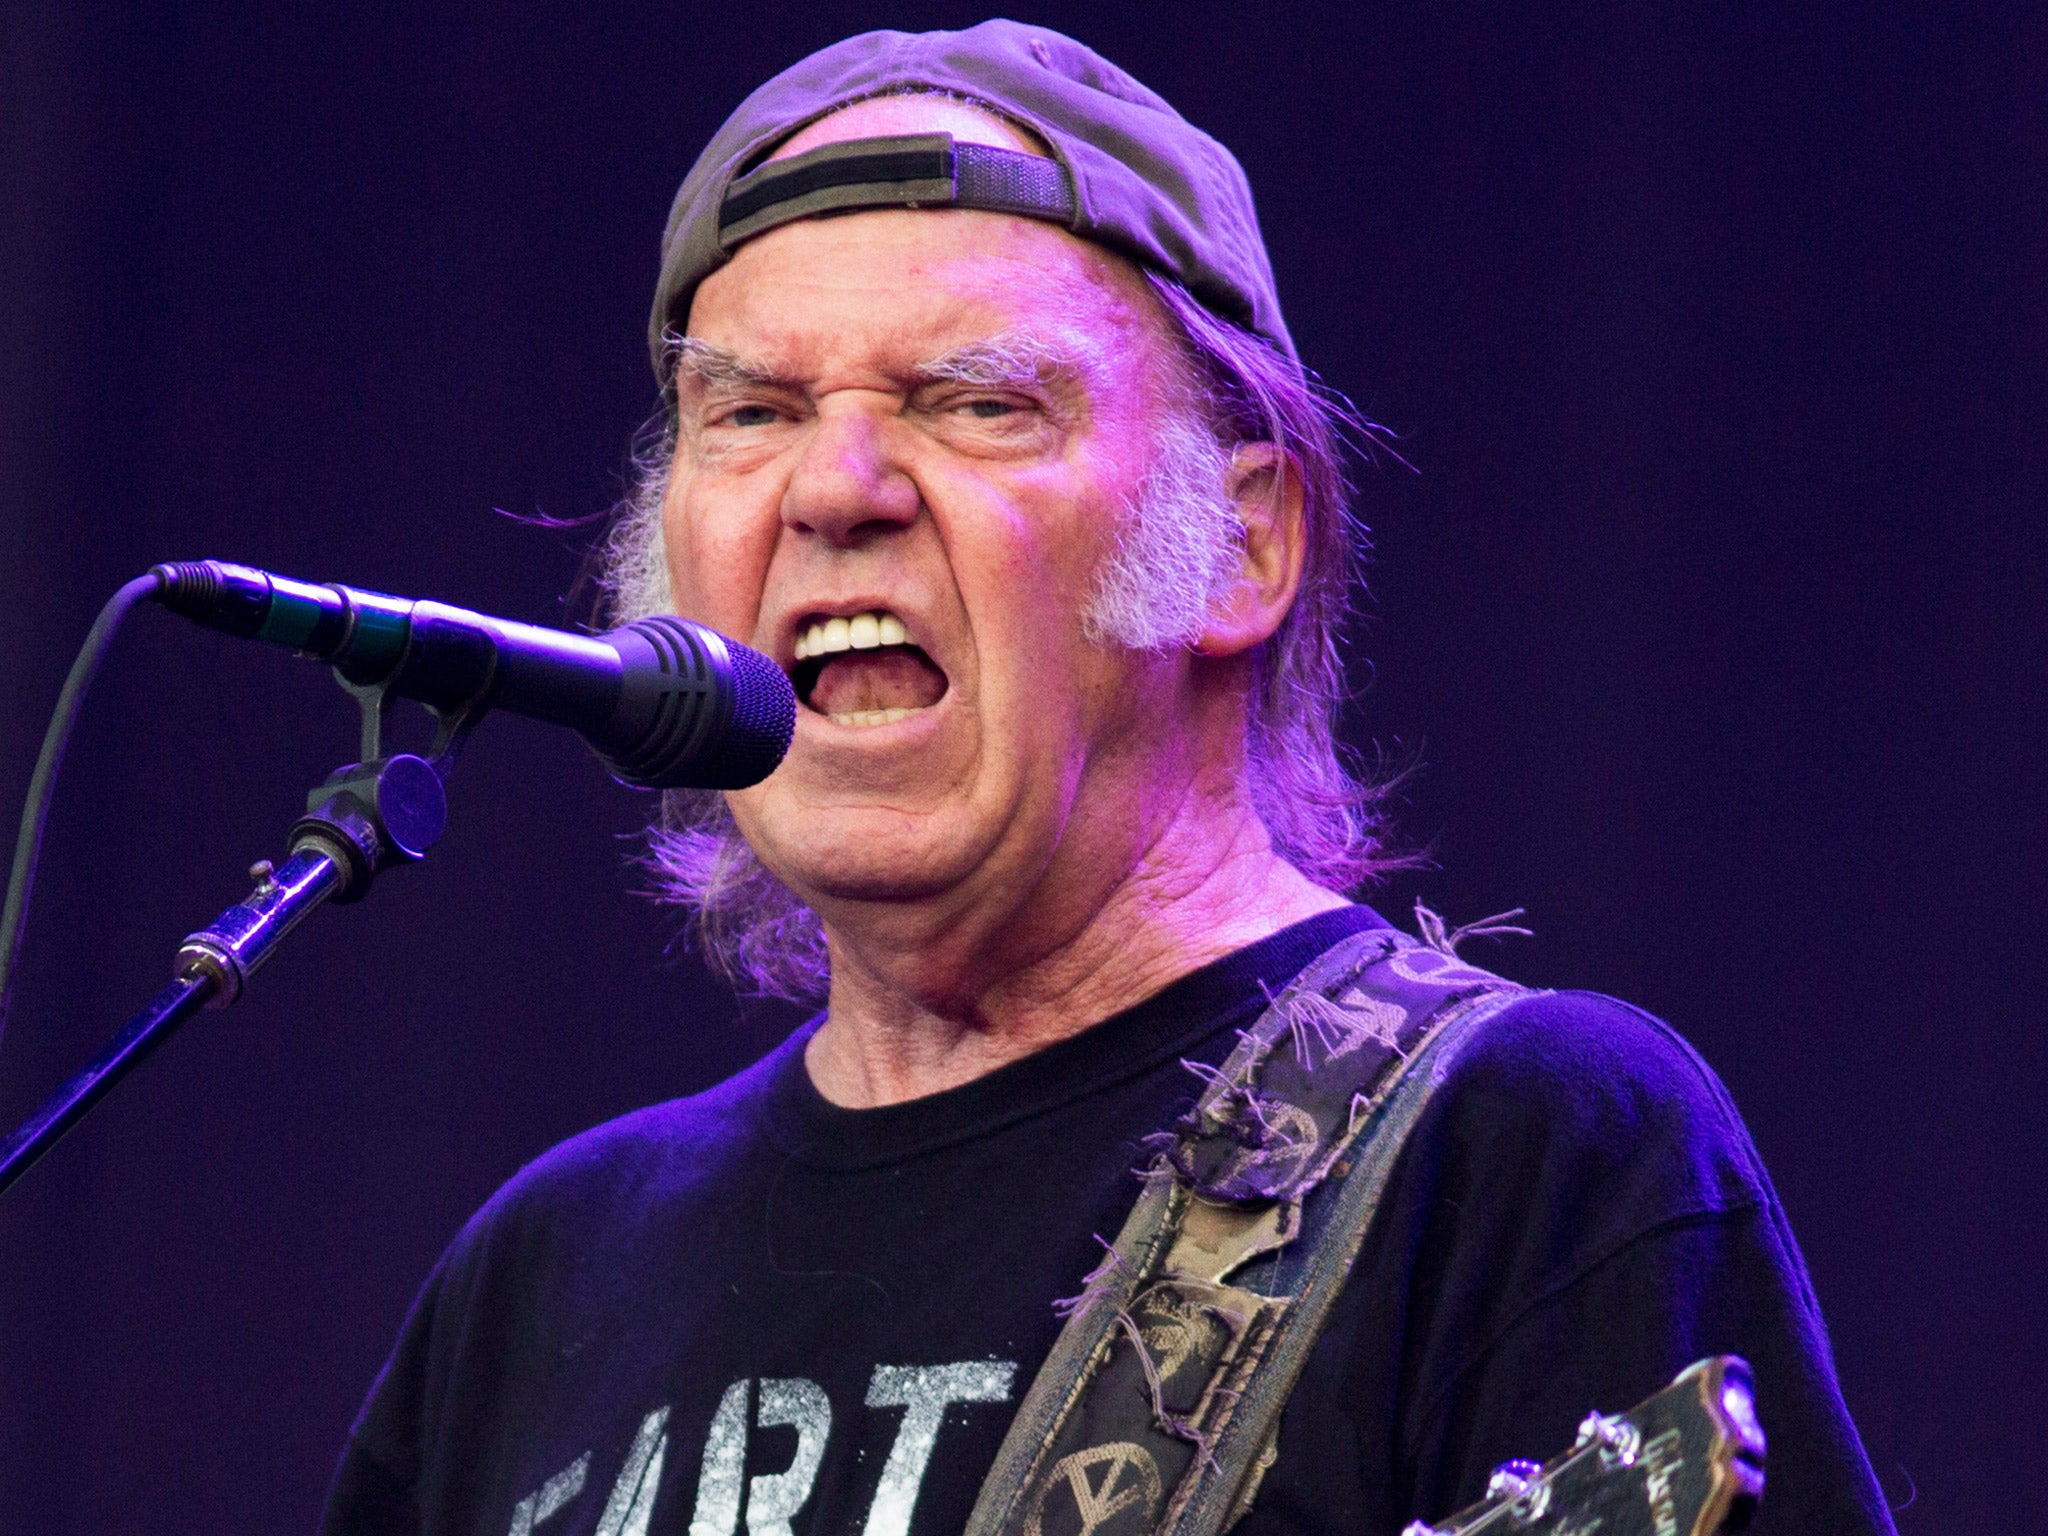 Neil Young's manager has promised a festival 'so special in many ways'